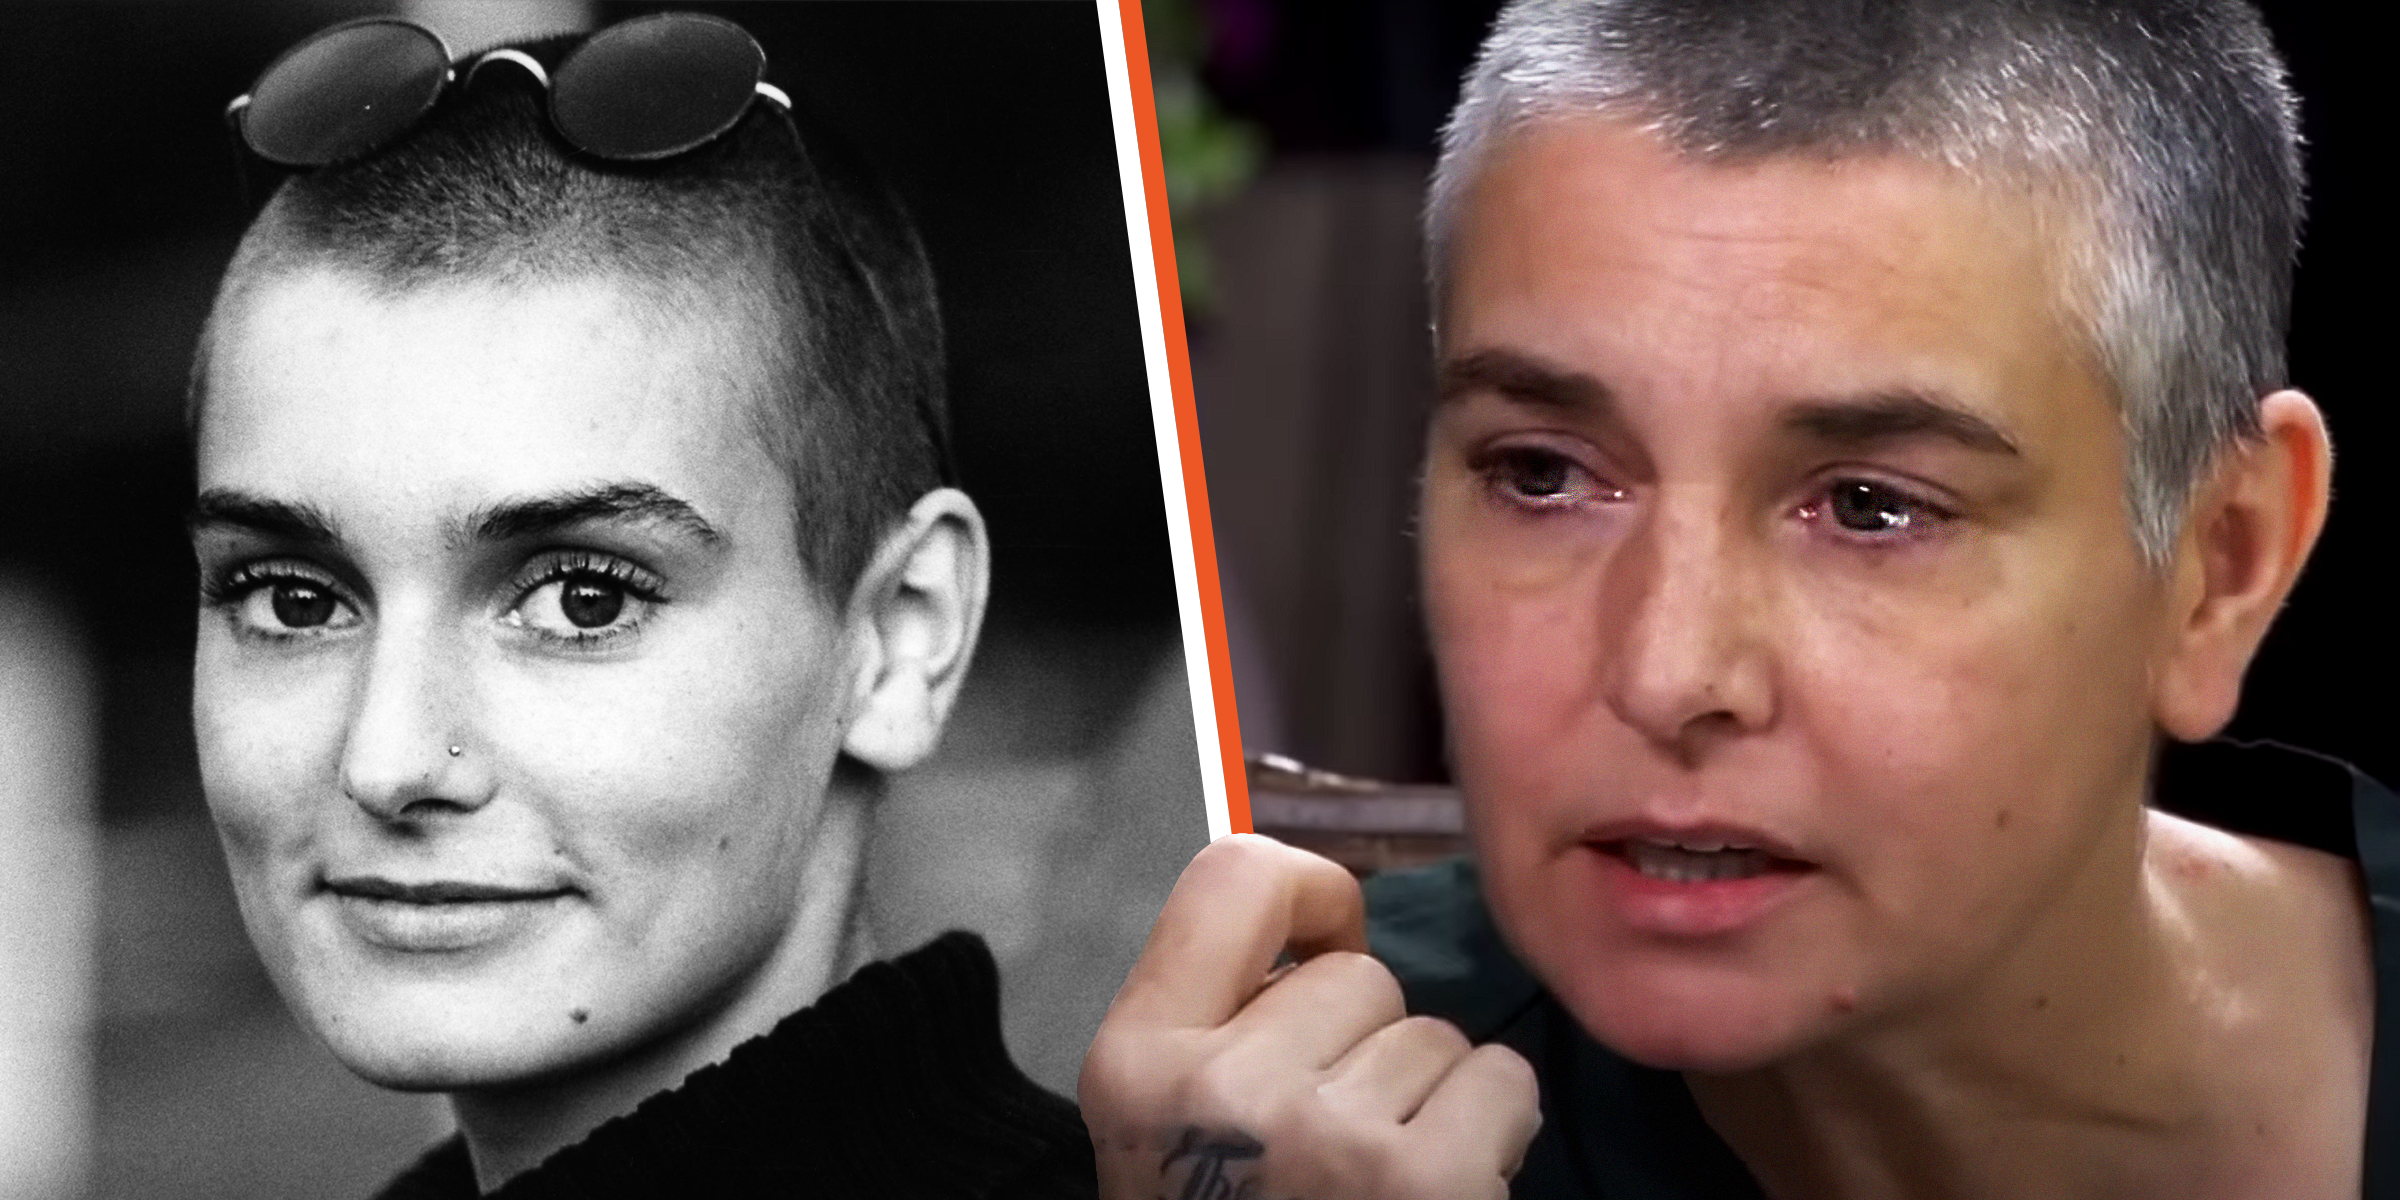 Sinéad O'Connor, 1990 and 2017 | Sources: Getty Images | YouTube.com/drphil